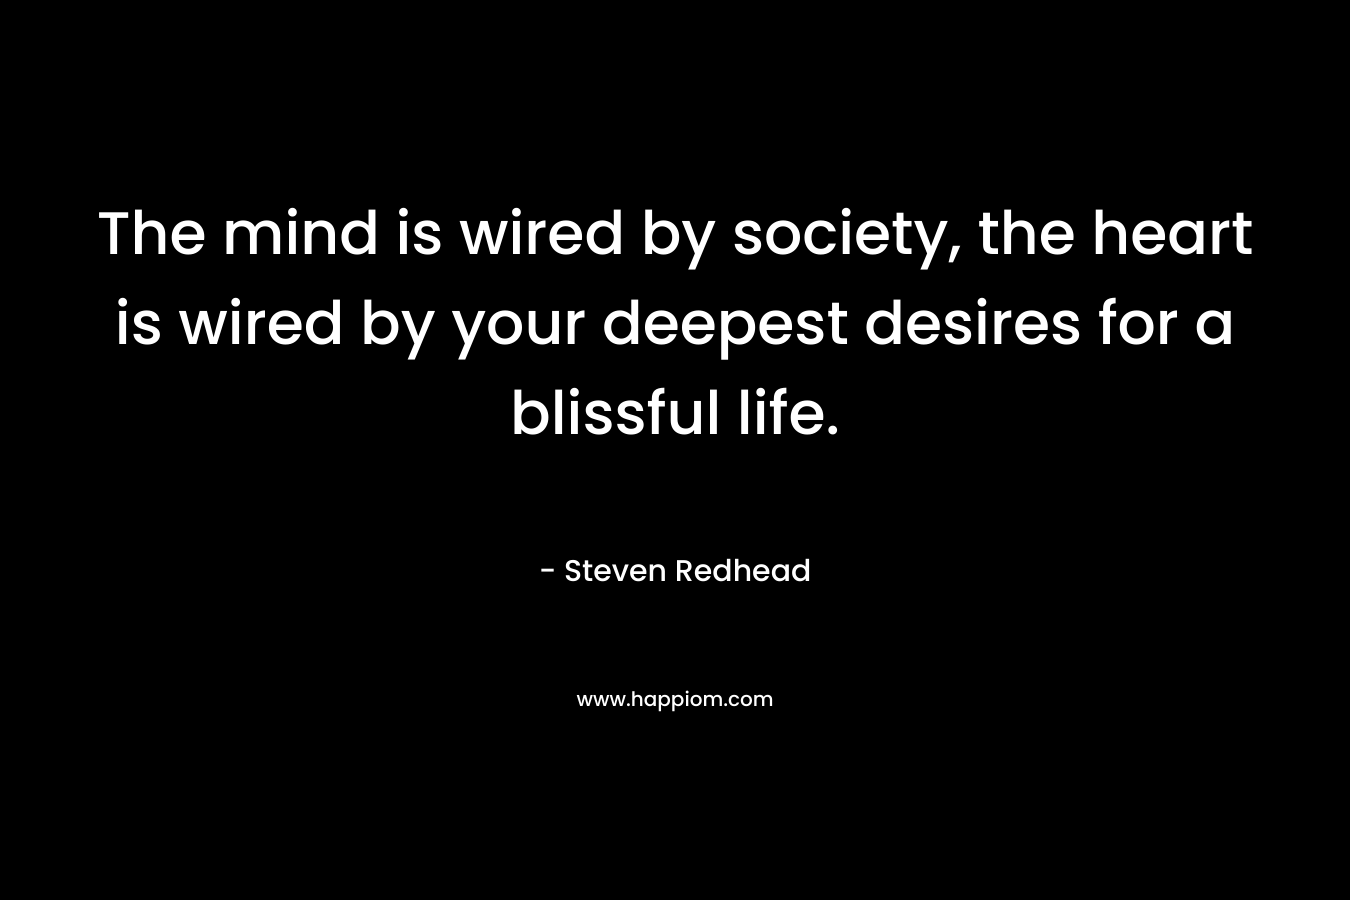 The mind is wired by society, the heart is wired by your deepest desires for a blissful life.